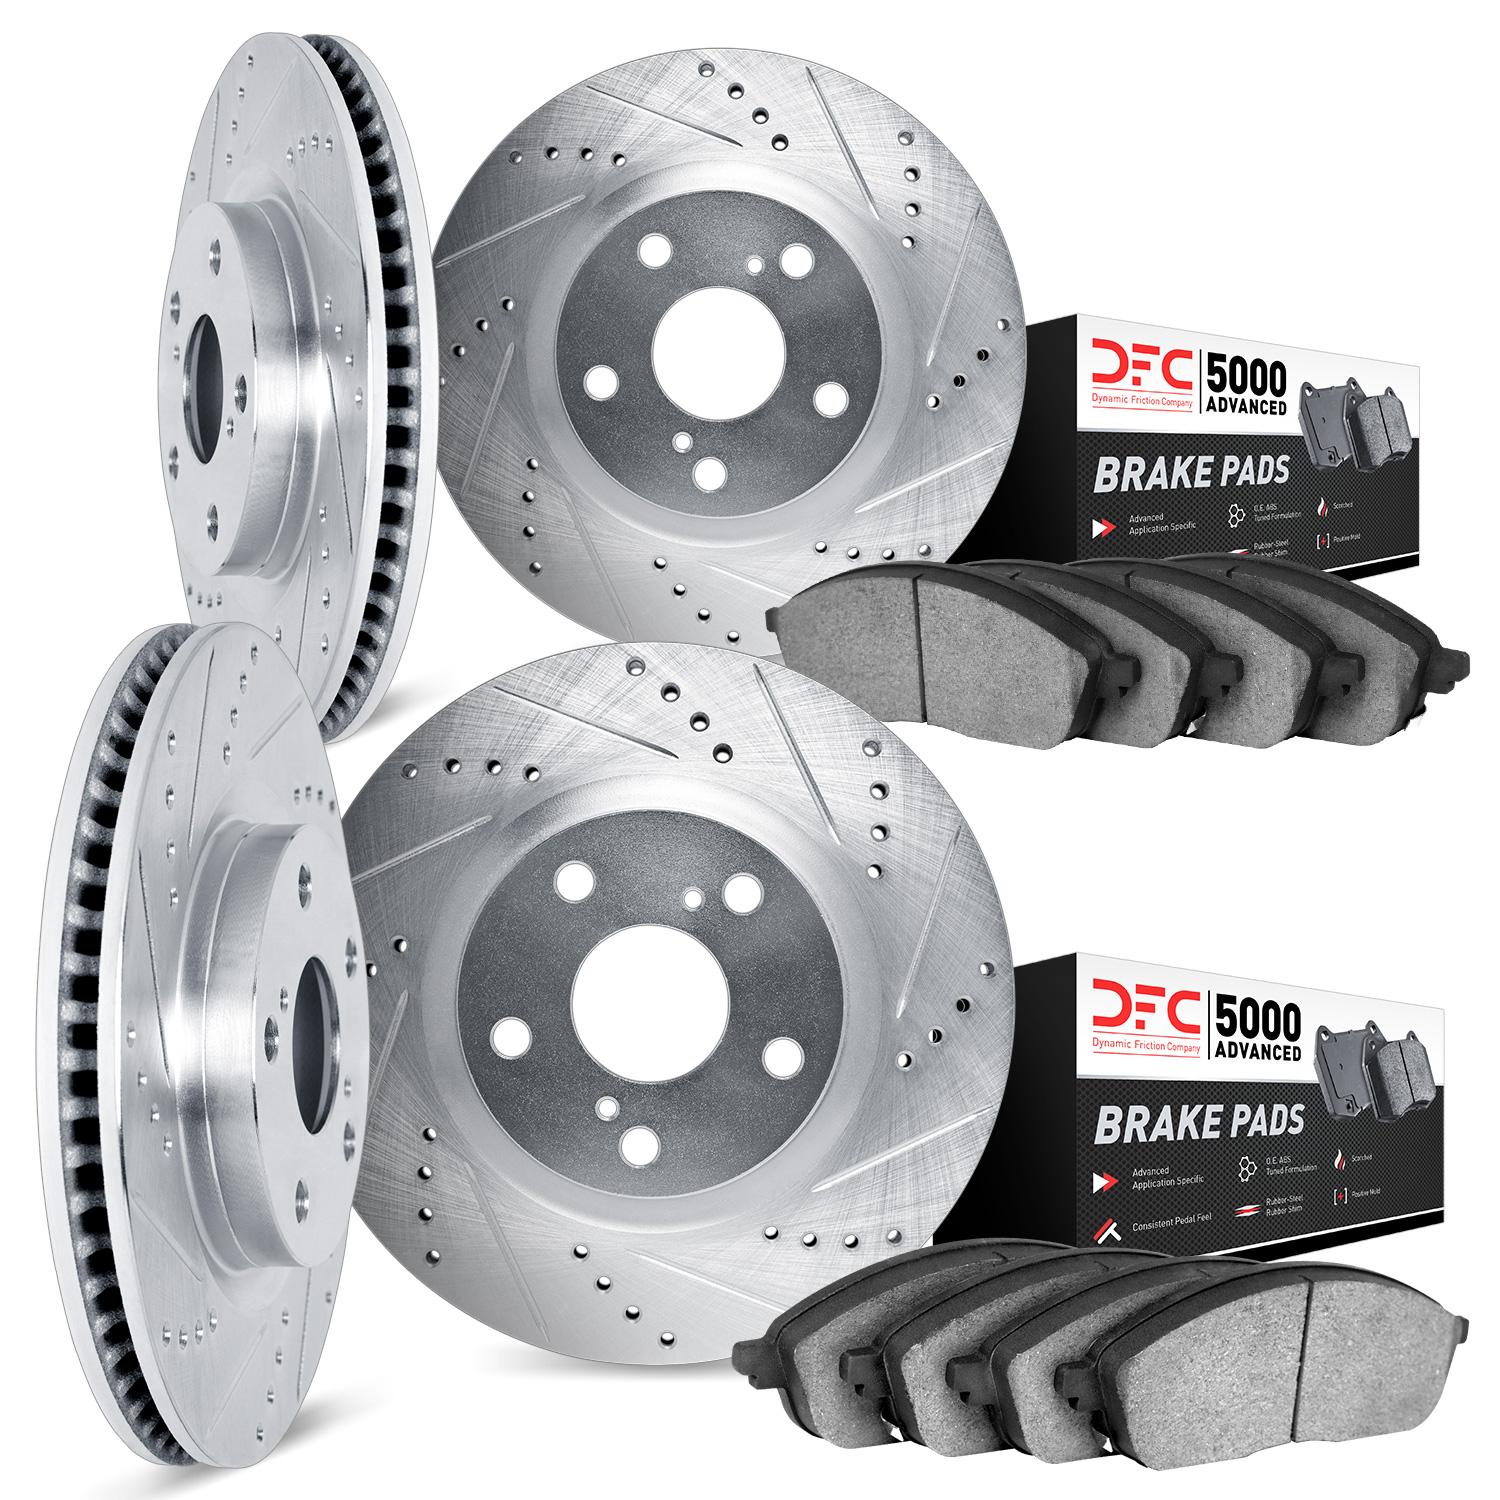 7504-74085 Drilled/Slotted Brake Rotors w/5000 Advanced Brake Pads Kit [Silver], 2011-2014 Porsche, Position: Front and Rear